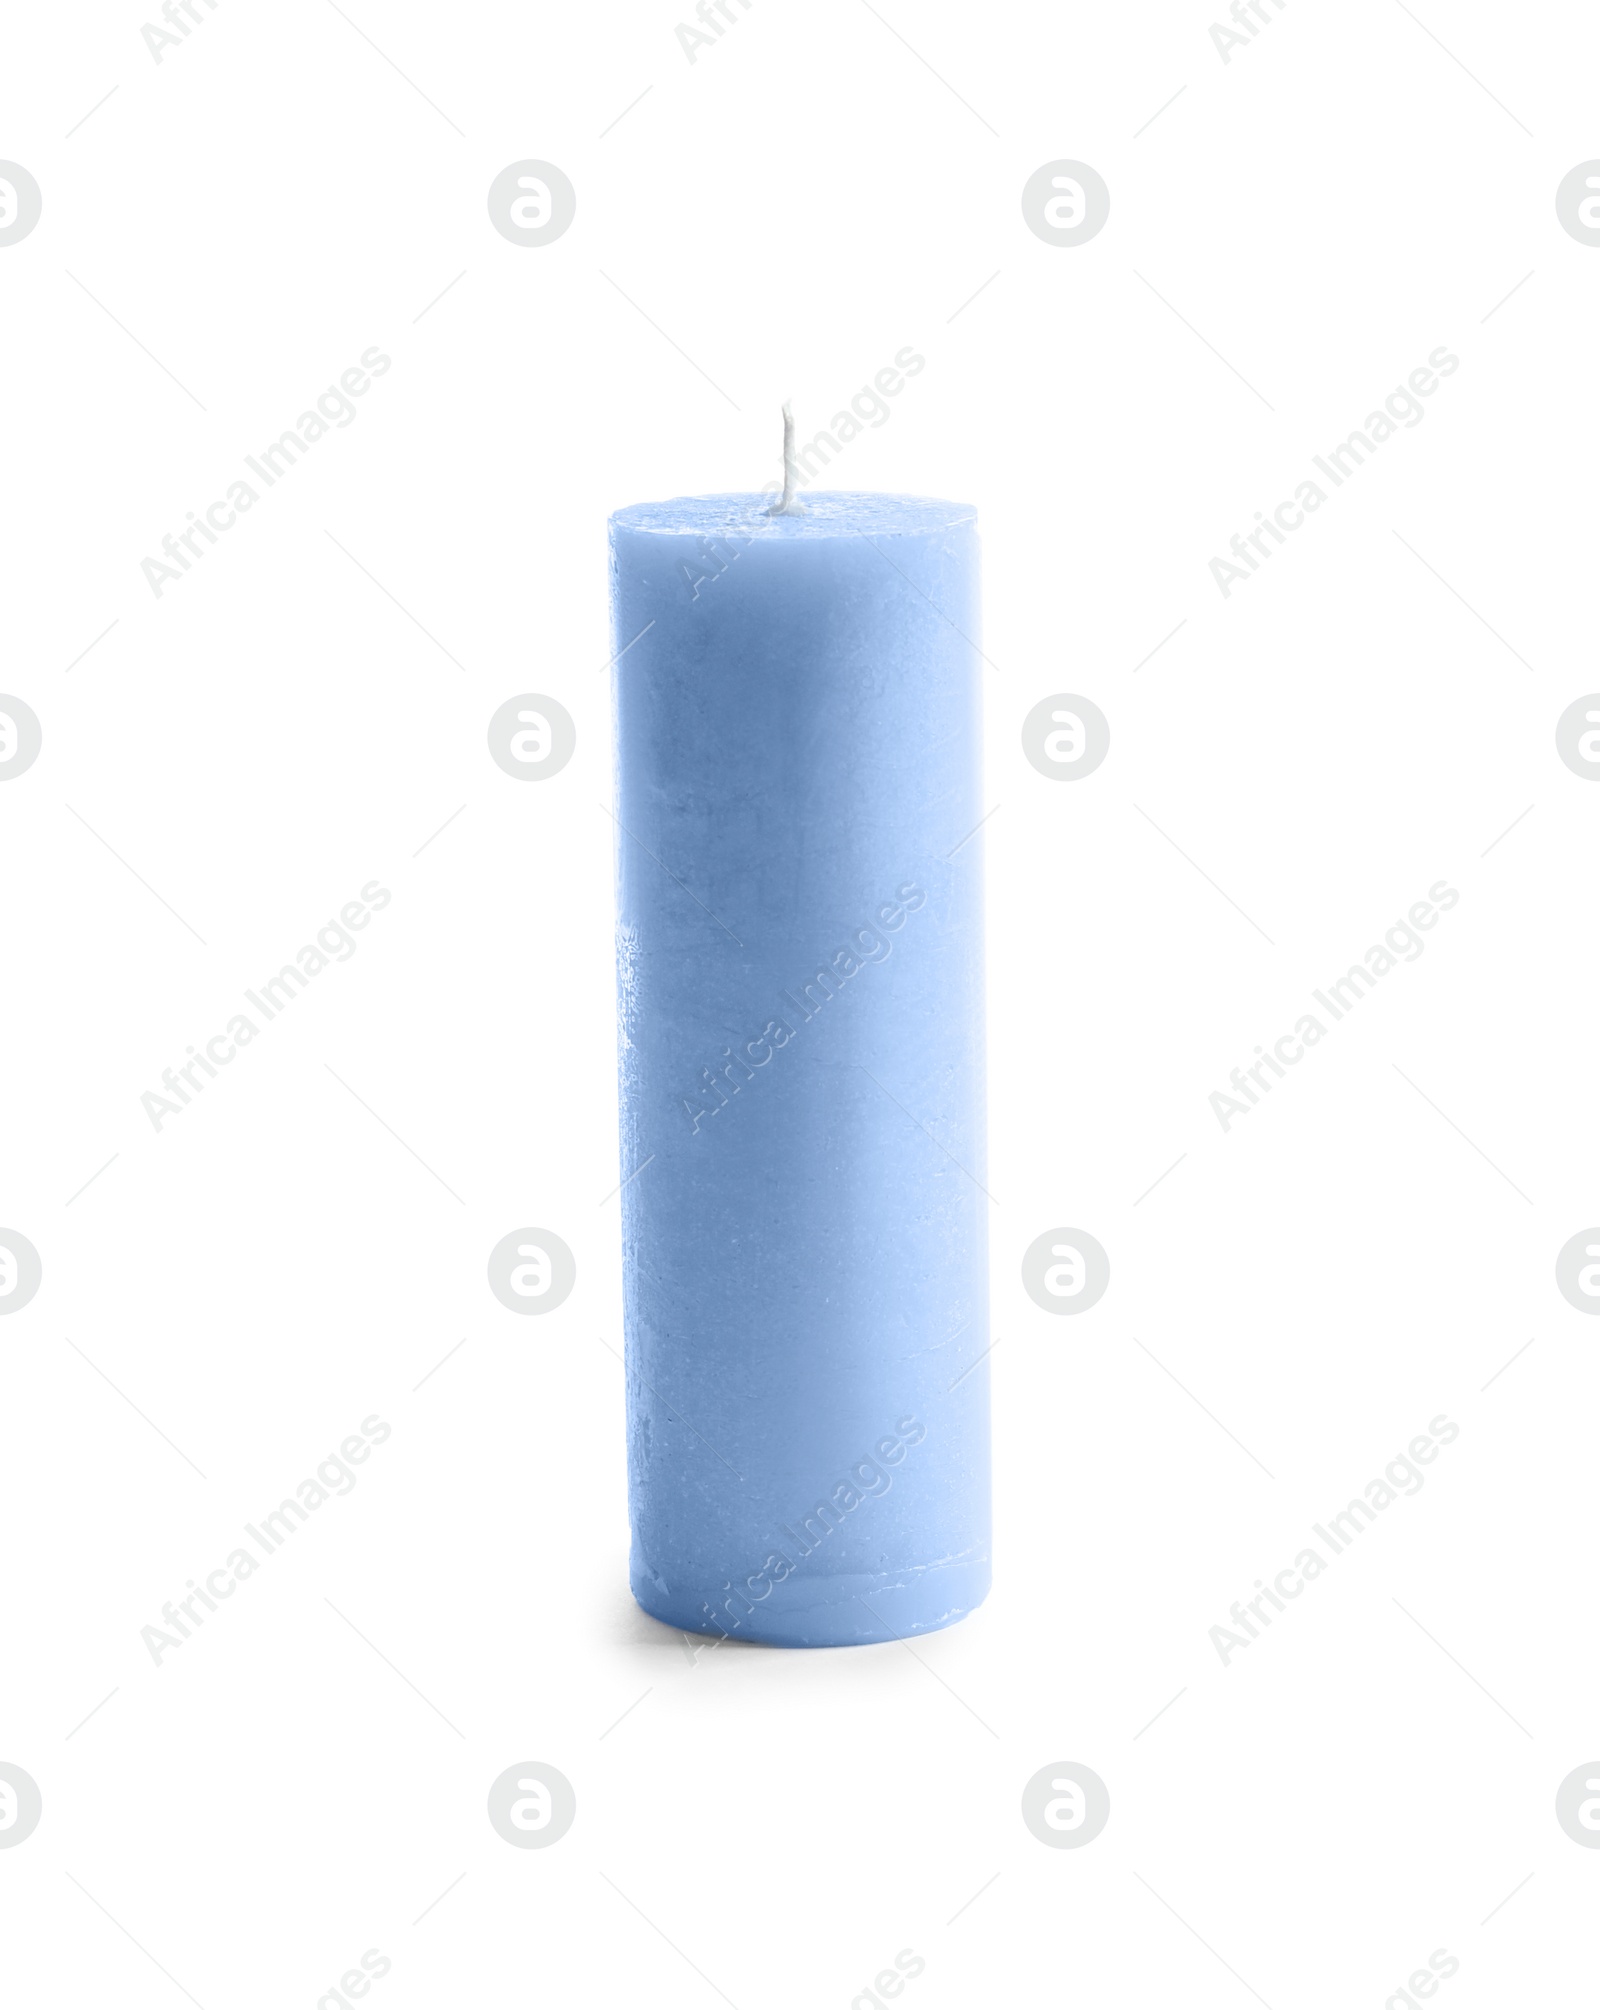 Photo of Blue pillar wax candle on white background